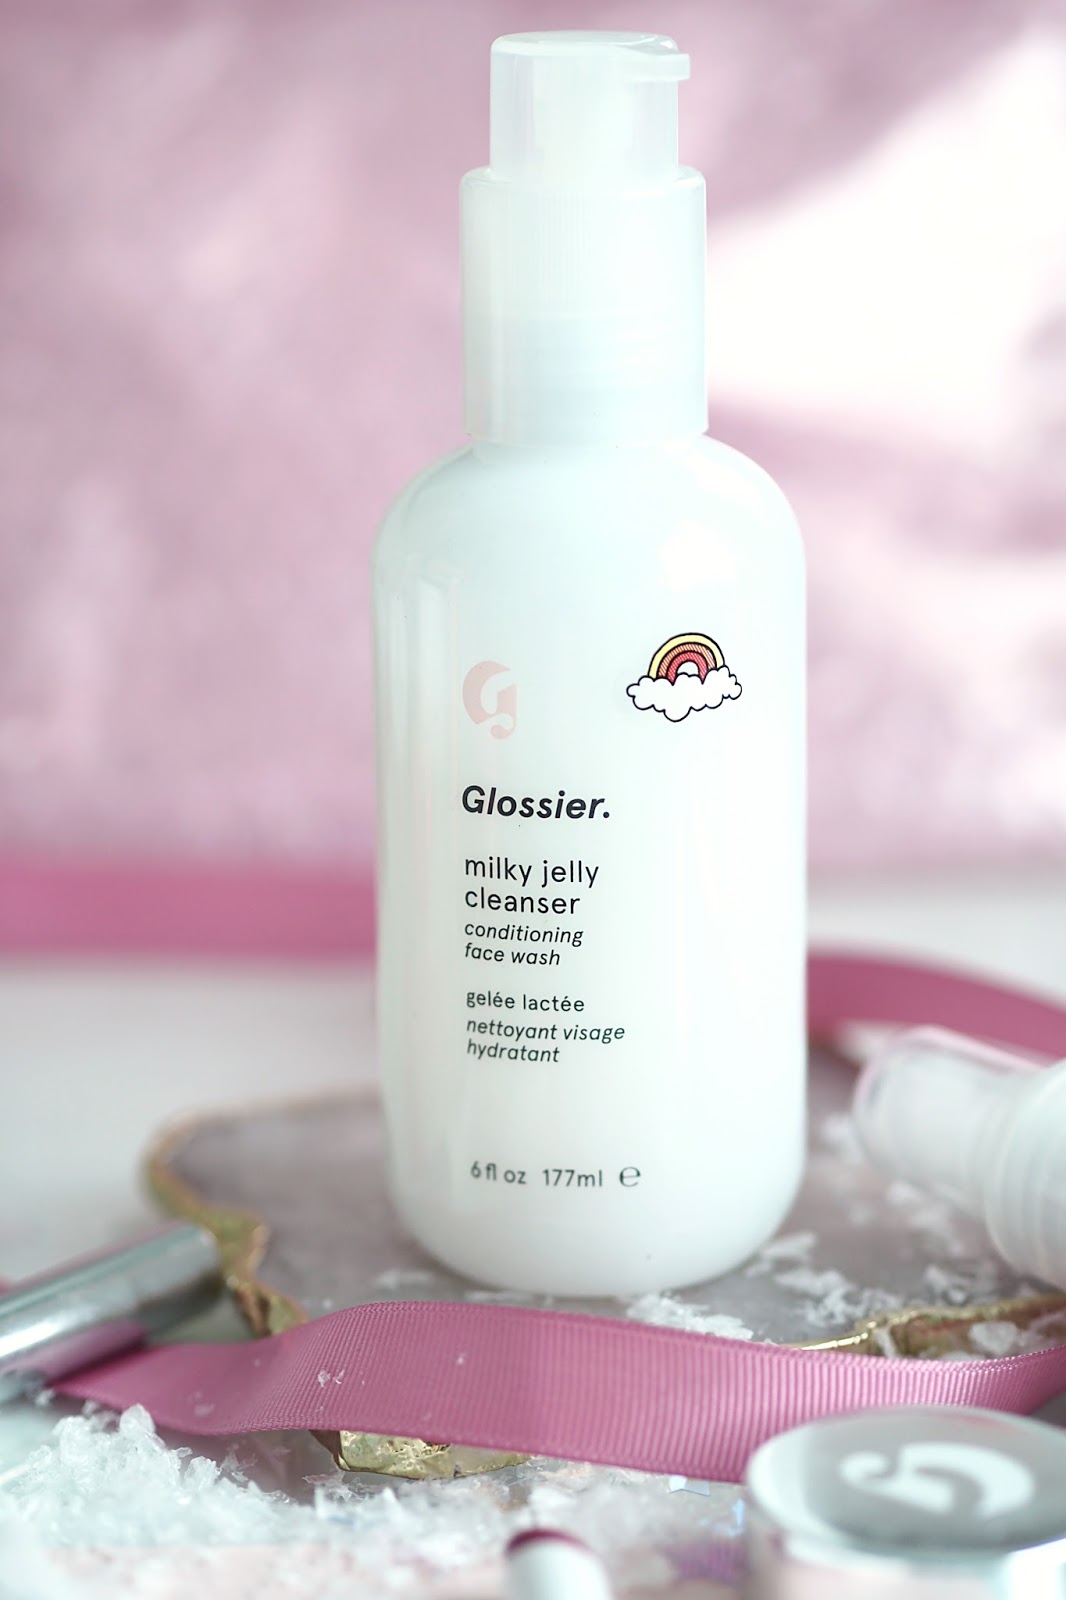 Glossier Milky Jelly cleanser